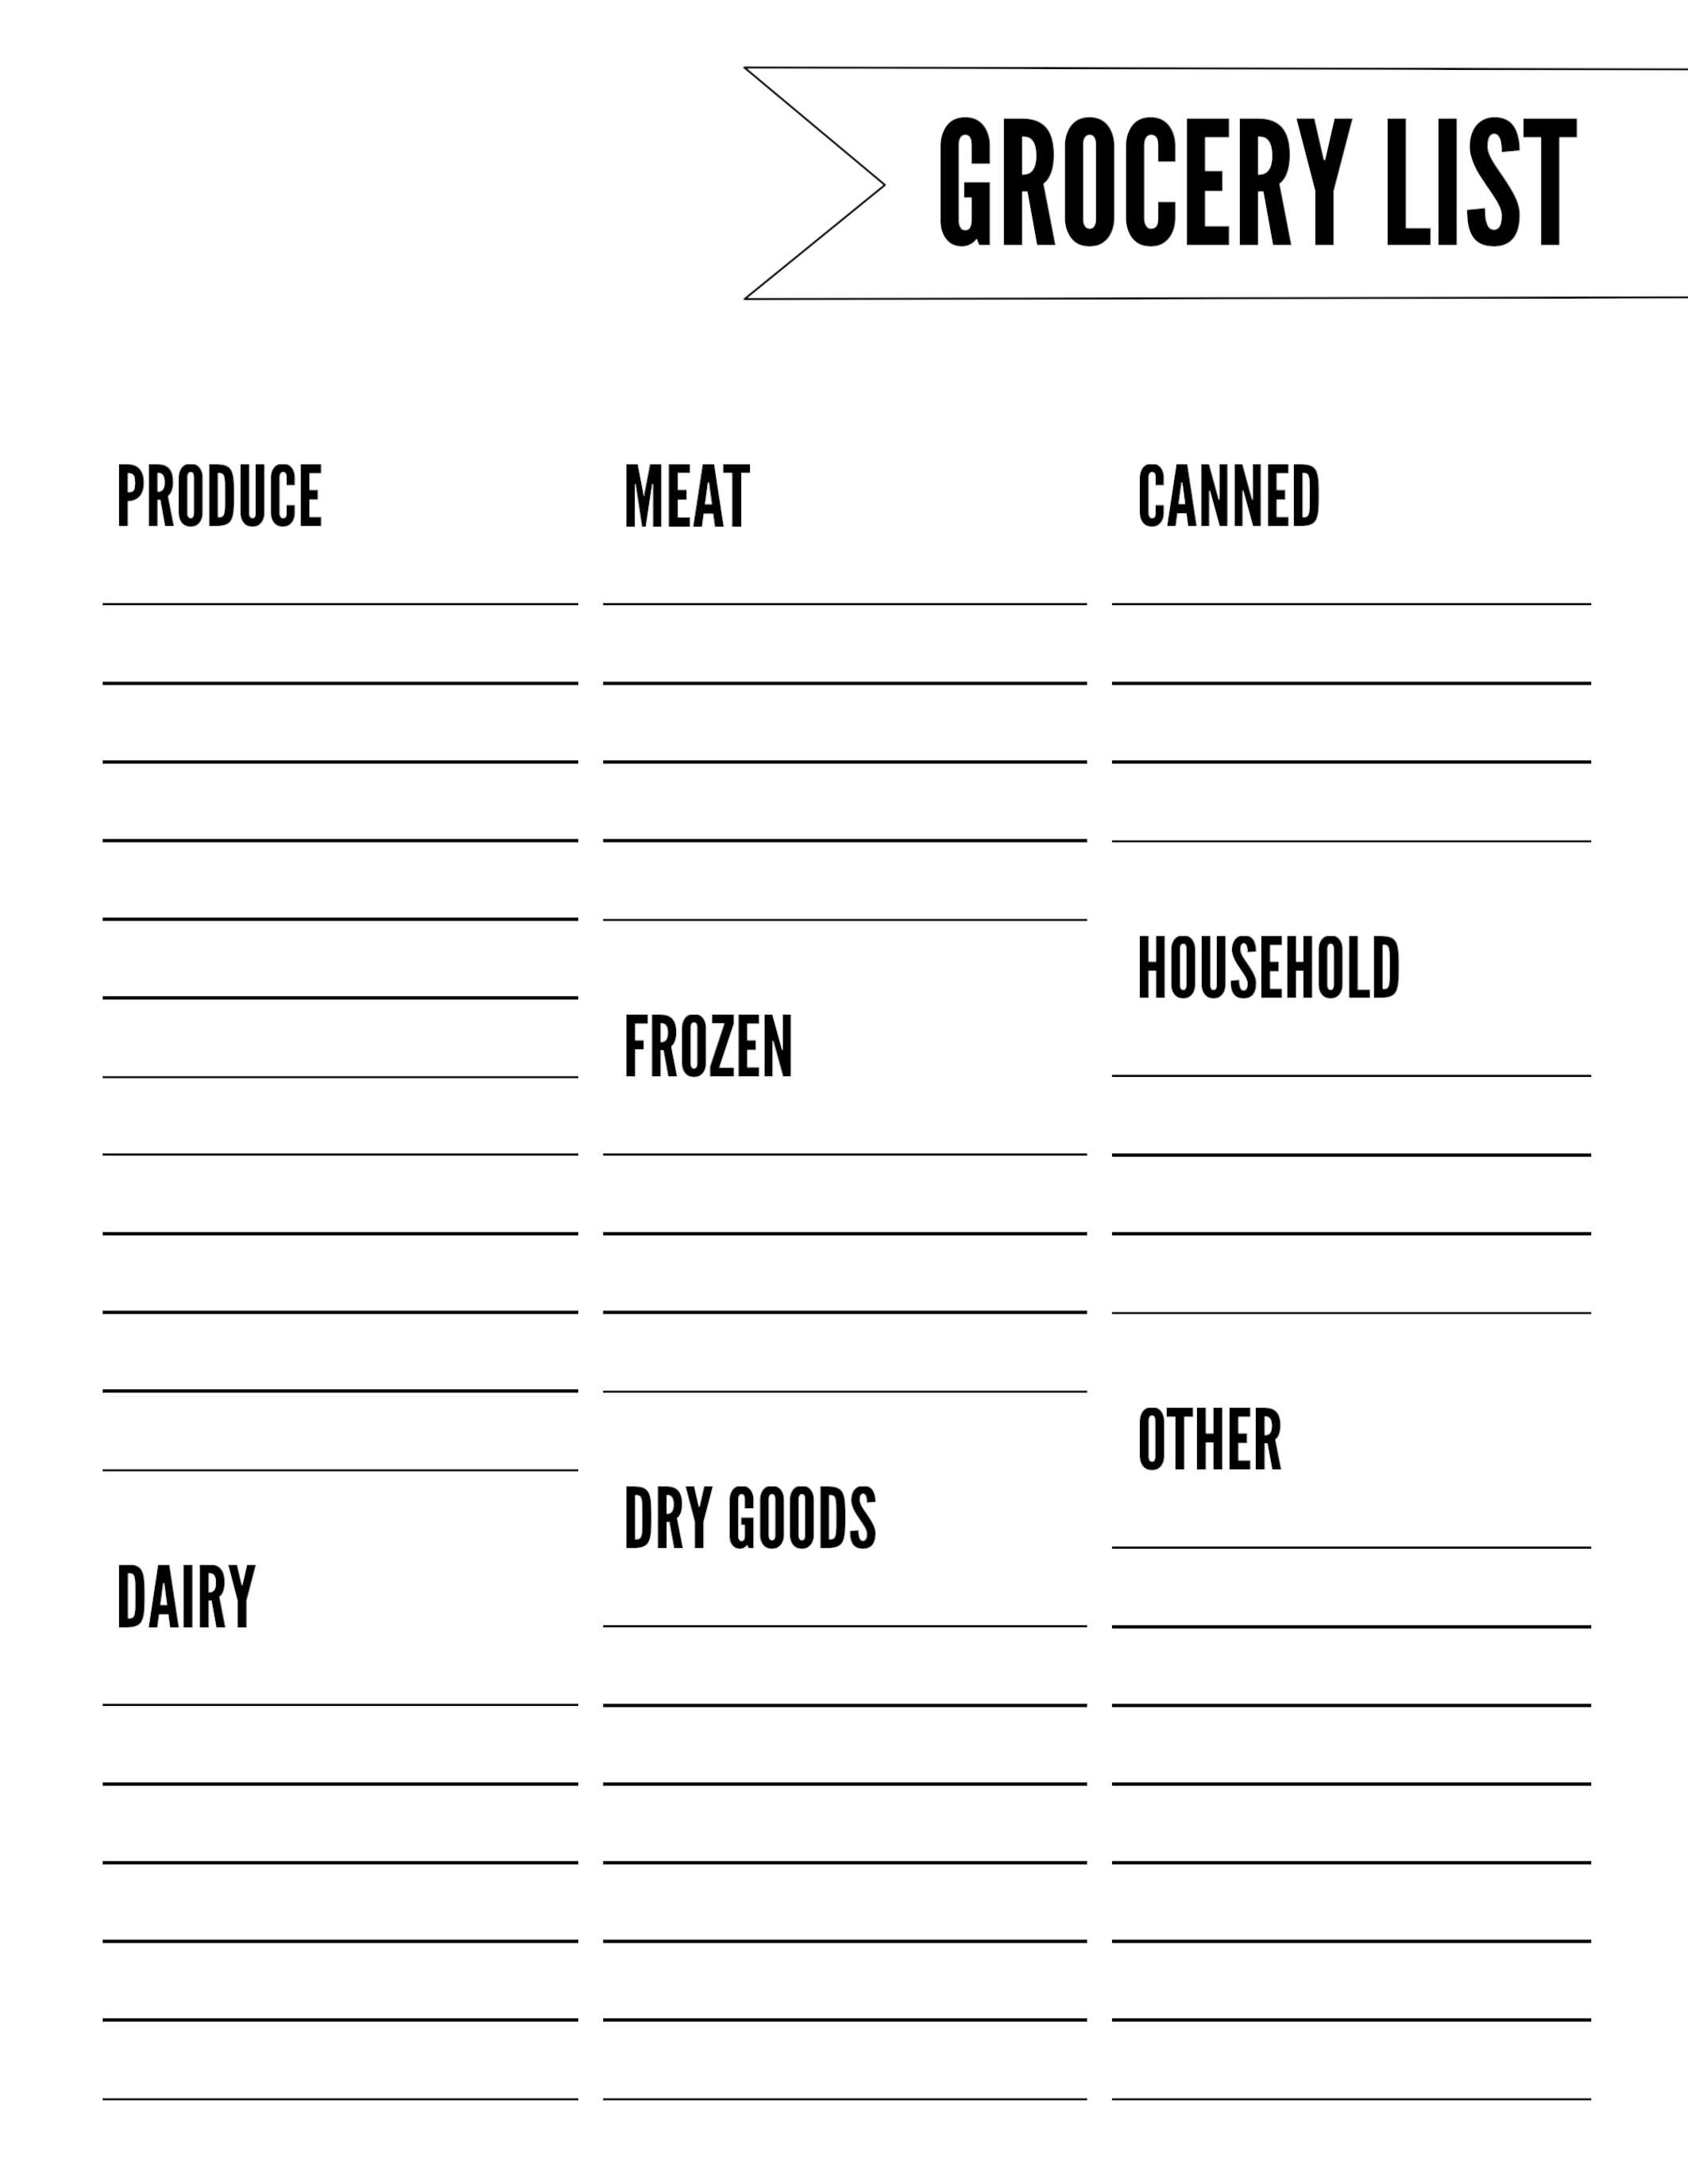 008 Grocery List Template Free Fantastic Ideas Shopping intended for Editable Grocery List